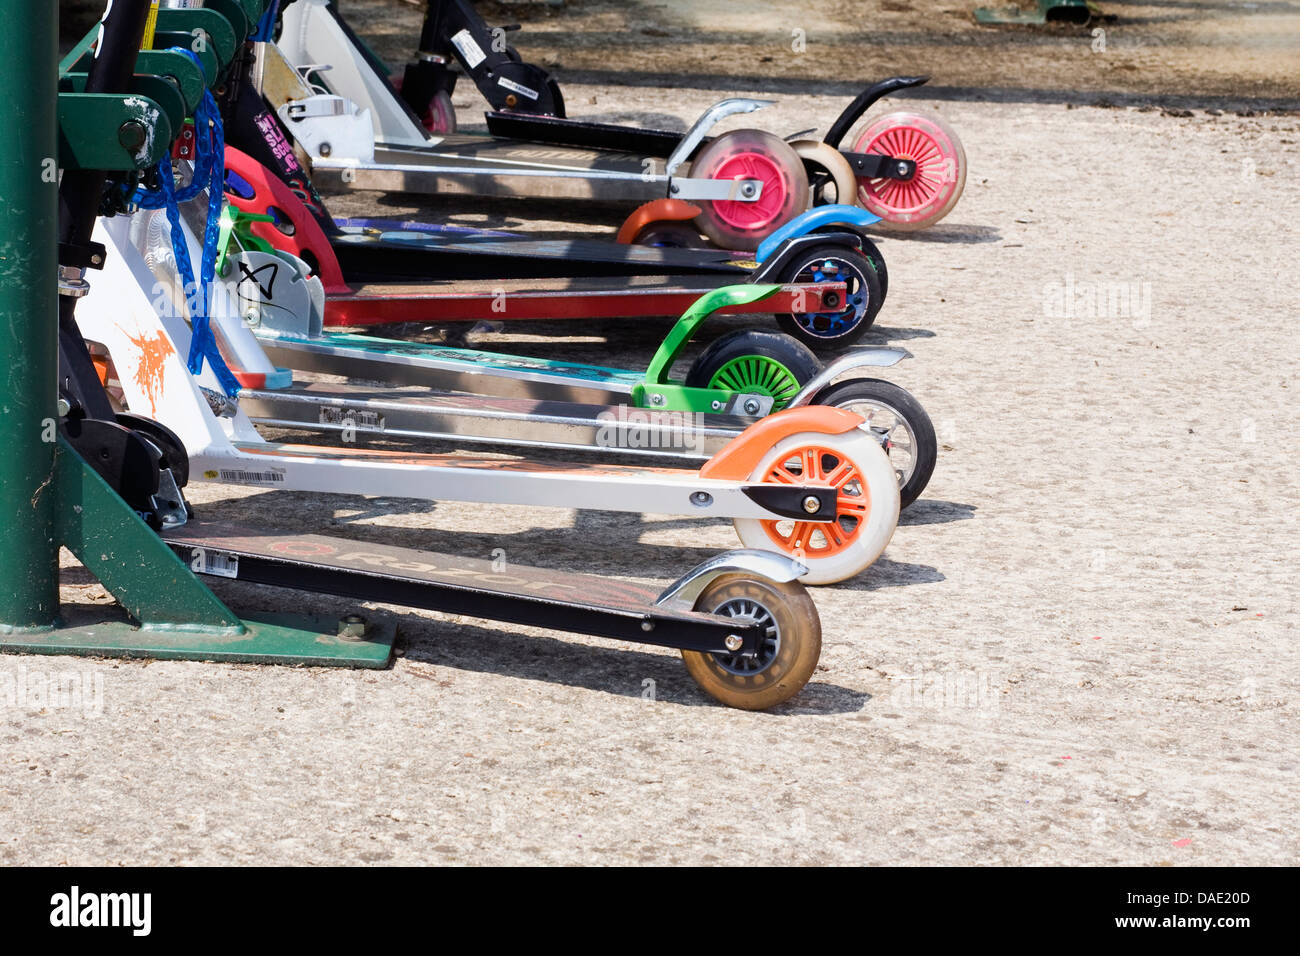 Children's scooters lined up at school. Stock Photo